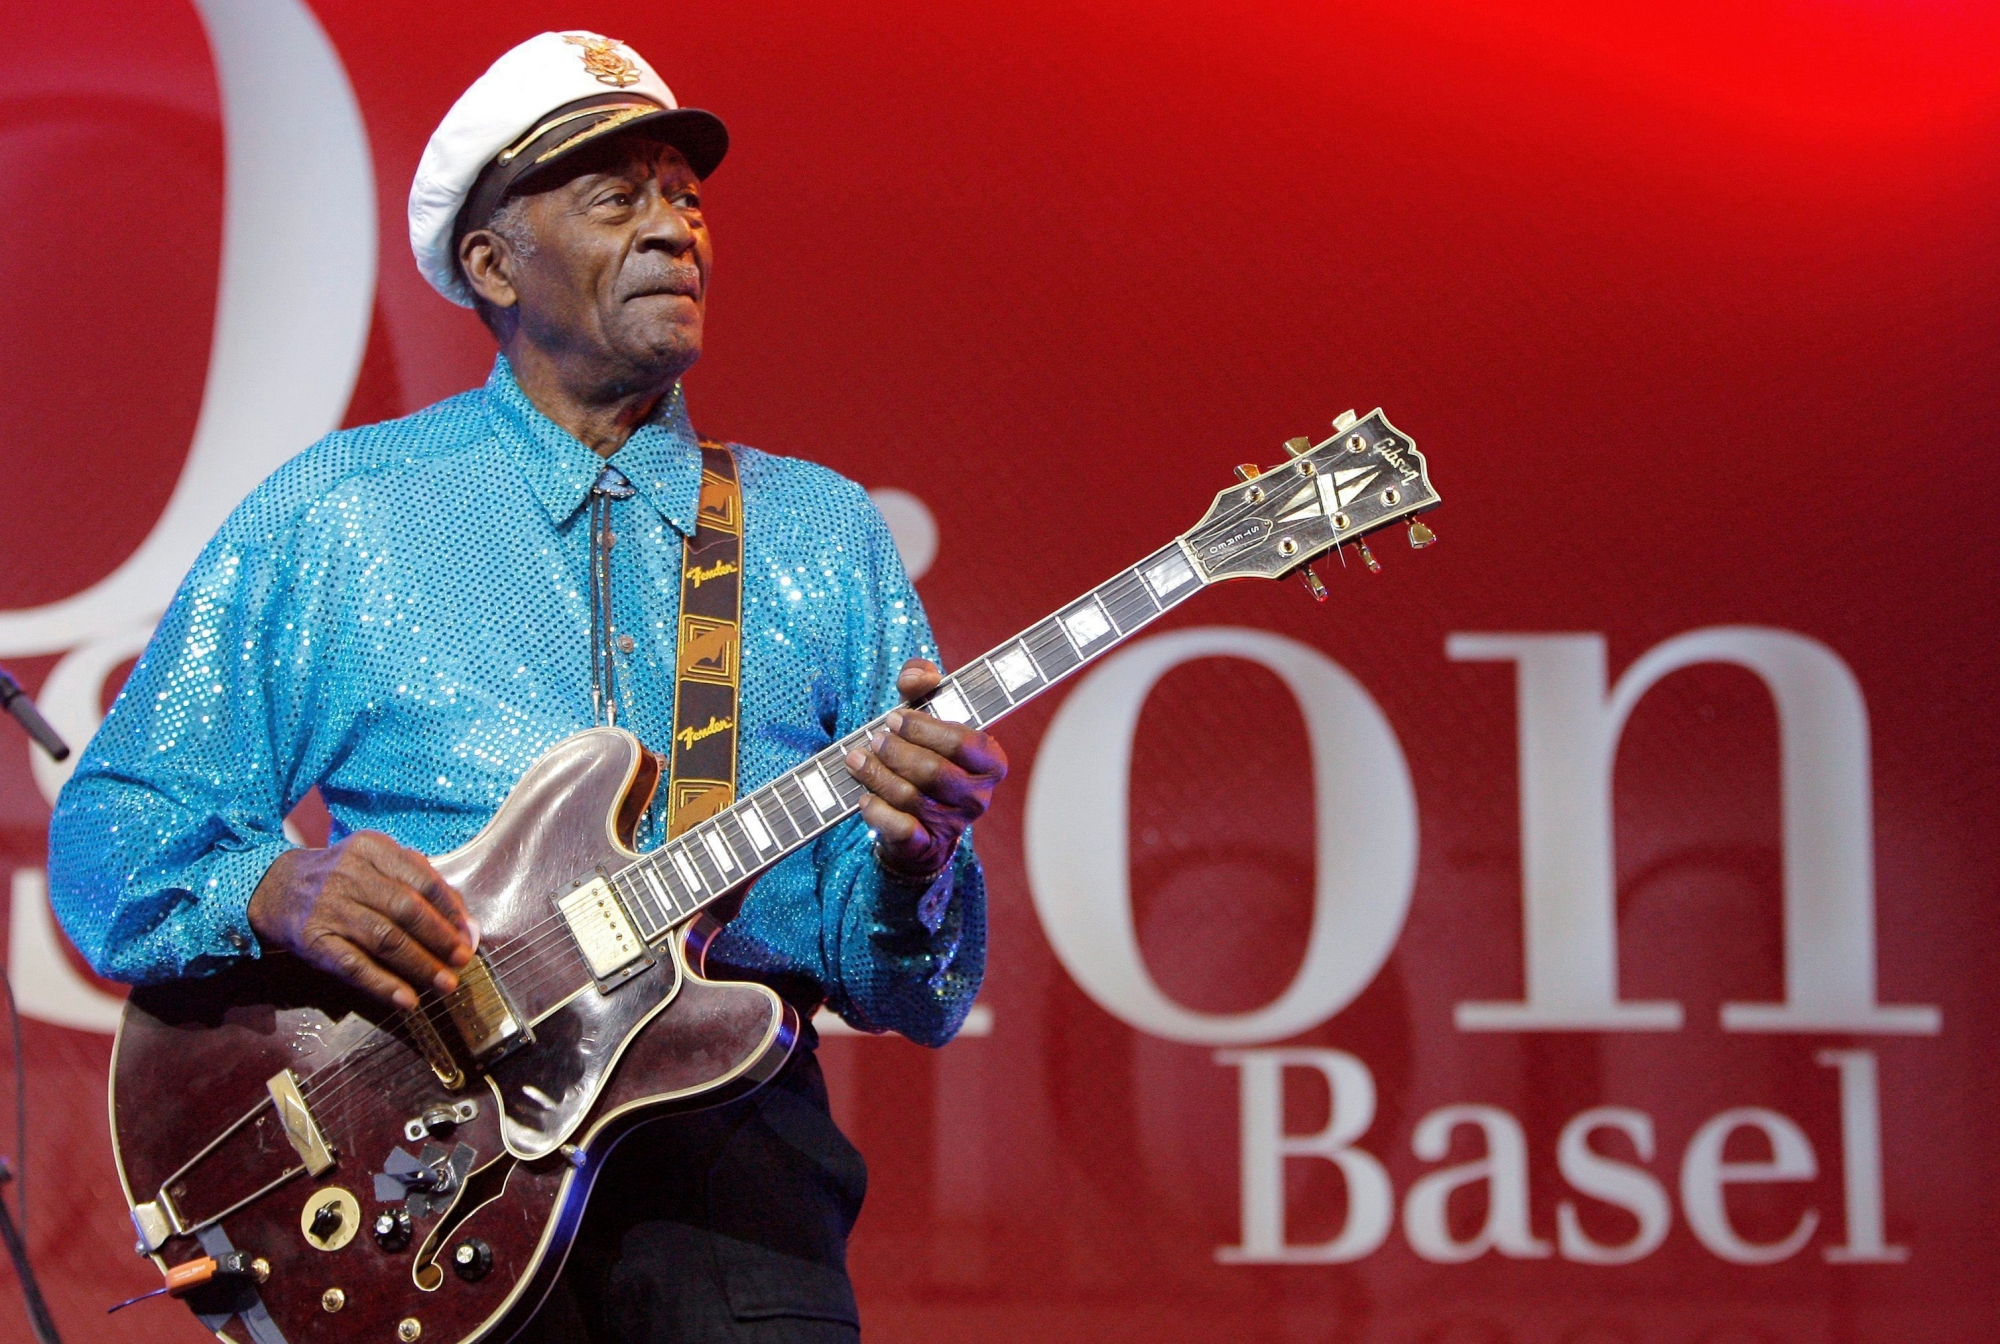 FILE - In this Nov. 13, 2007 file photo, legendary U.S. musician Chuck Berry performs on stage at the Avo Session in Basel, Switzerland. Berry, rock 'n' roll's founding guitar hero and storyteller who defined the music's joy and rebellion in such classics as "Johnny B. Goode," ''Sweet Little Sixteen" and "Roll Over Beethoven," died Saturday, March 18, 2017, at his home west of St. Louis. He was 90. (Peter Klaunzer/Keystone via AP, File) Obit Chuck Berry